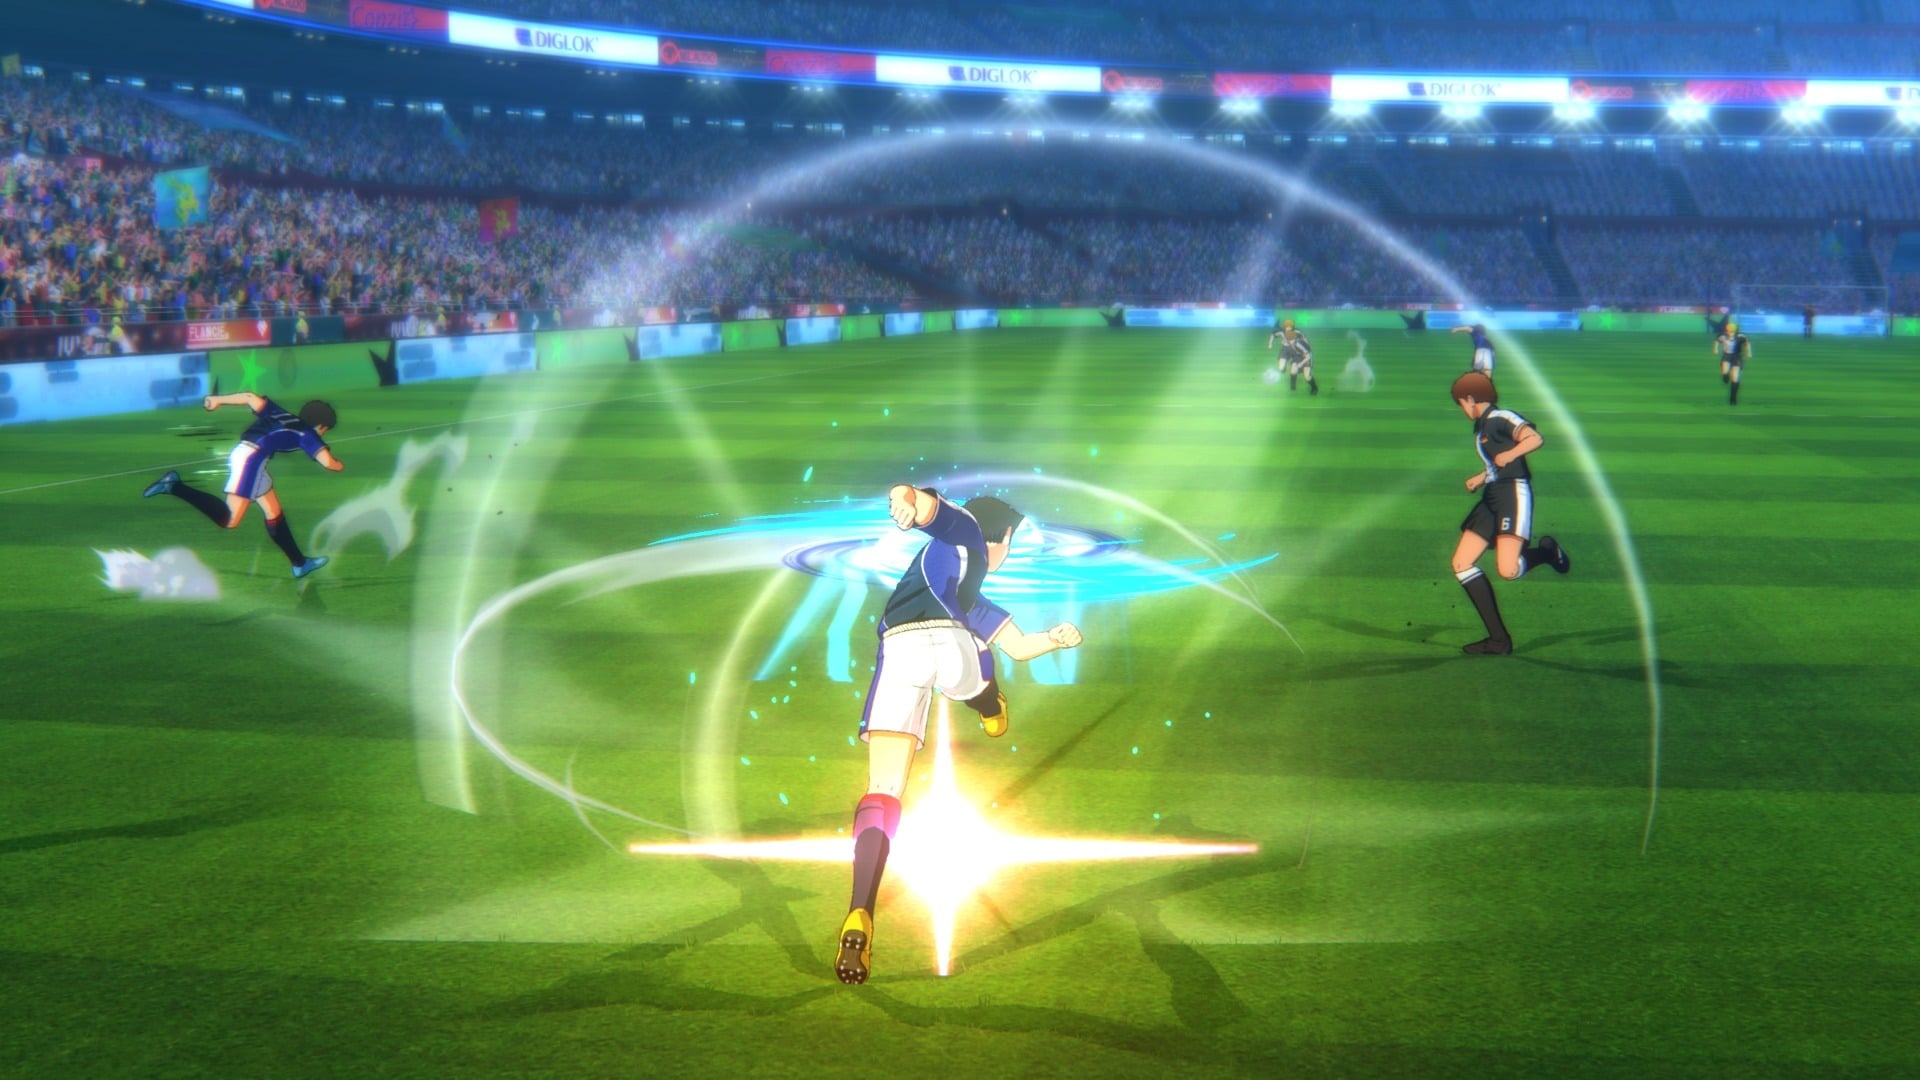 CAPTAIN TSUBASA RISE OF NEW CHAMPIONS INTRODUCES PLAYERS TO THE PITCH WITH  NEW GAMEPLAY FOOTAGE  GamesReviewscom